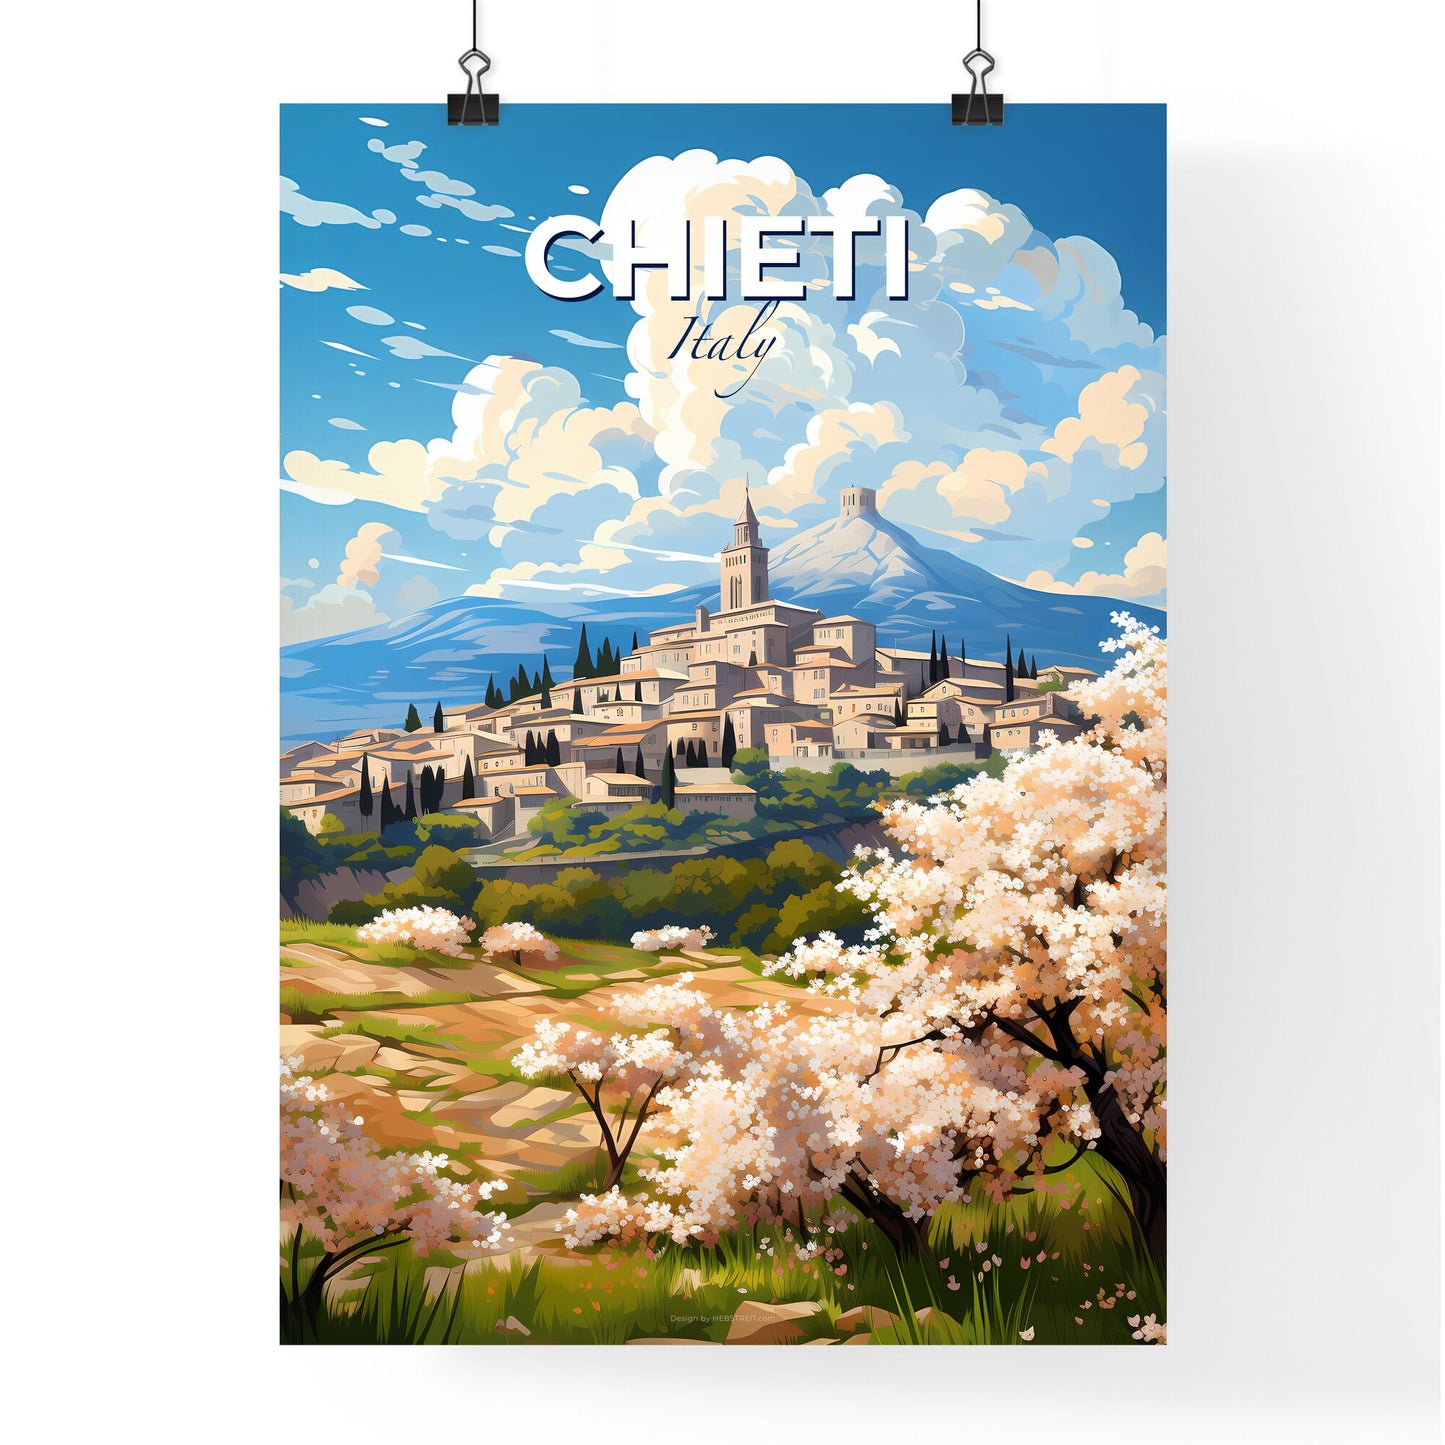 Chieti, Italy, A Poster of a landscape of a town with trees and mountains in the background Default Title